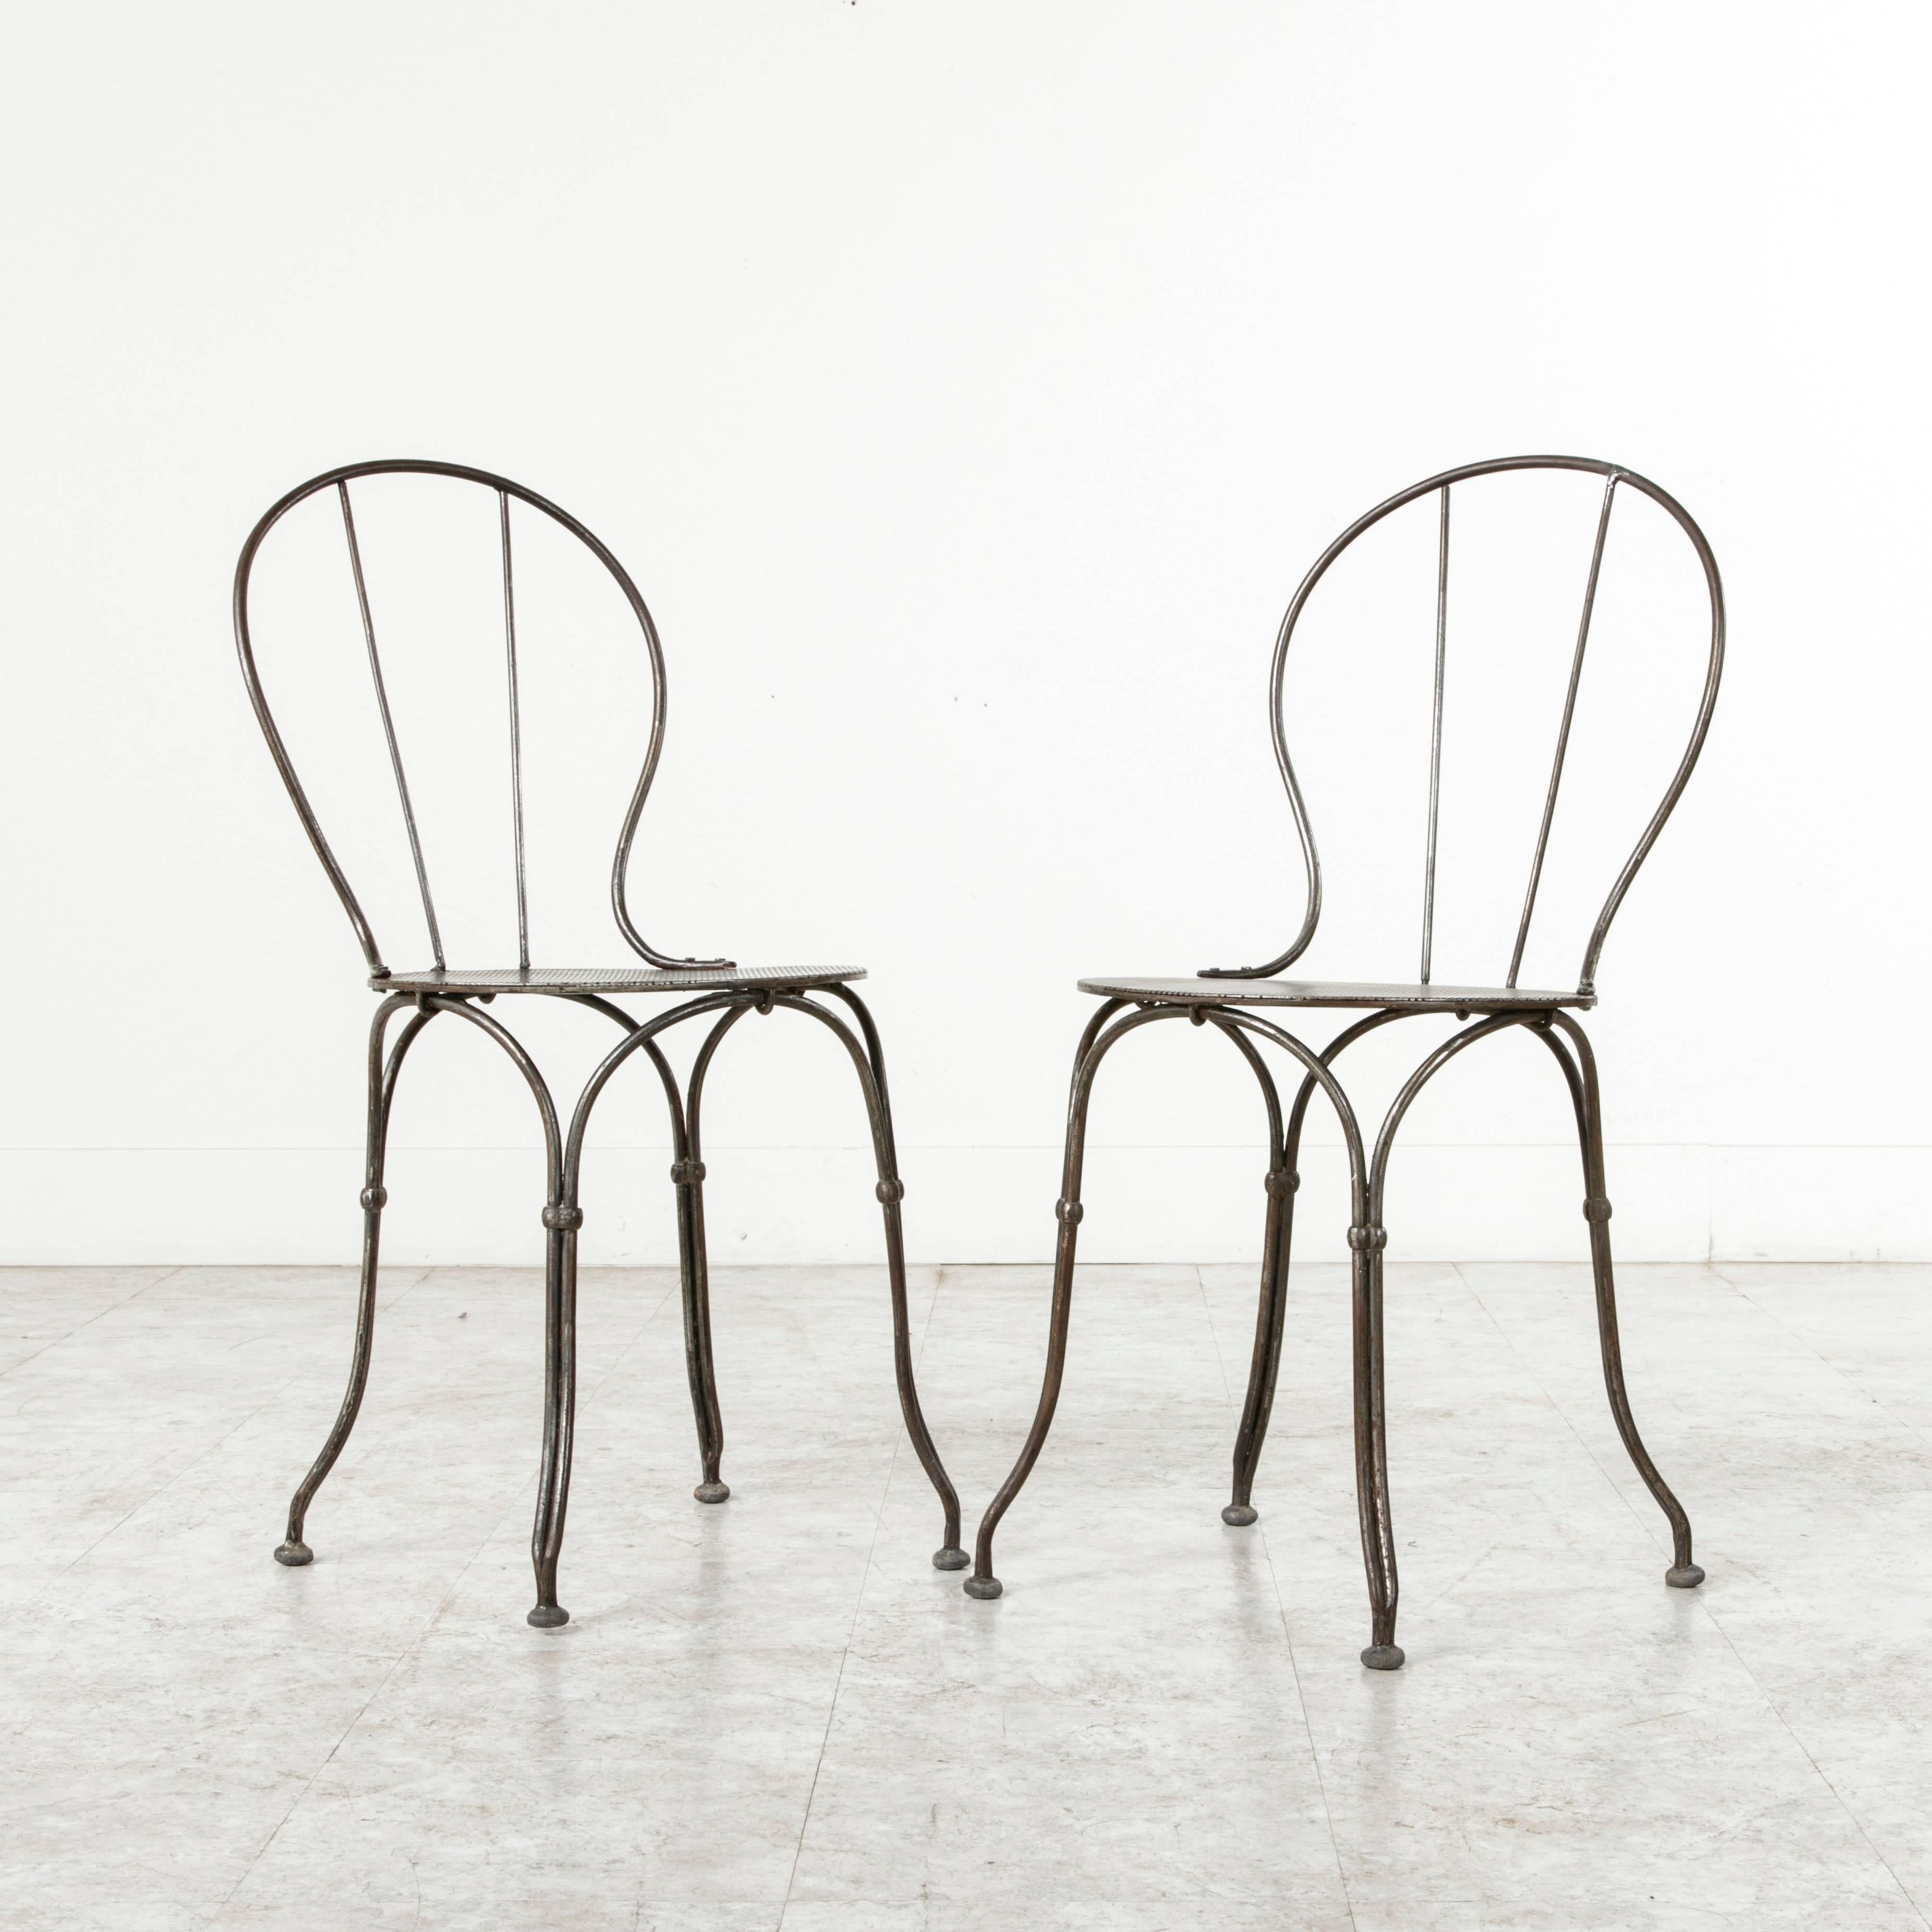 Pair of Late 19th Century Iron Garden Chairs with Pierced Seats 3